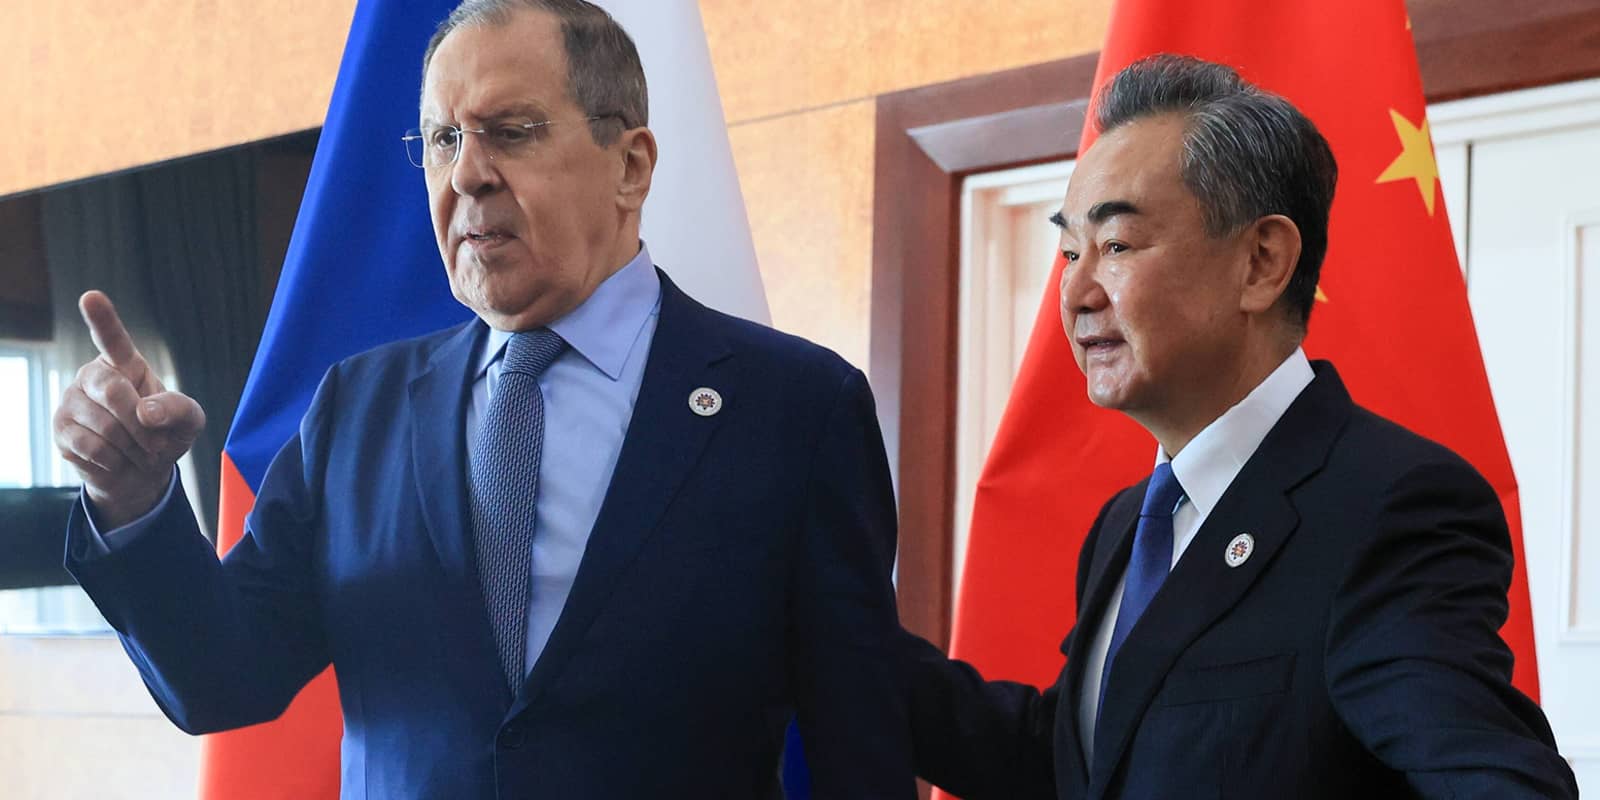 Russian Foreign Minister Sergey Lavrov and Chinese Foreign Minister Wang Yi